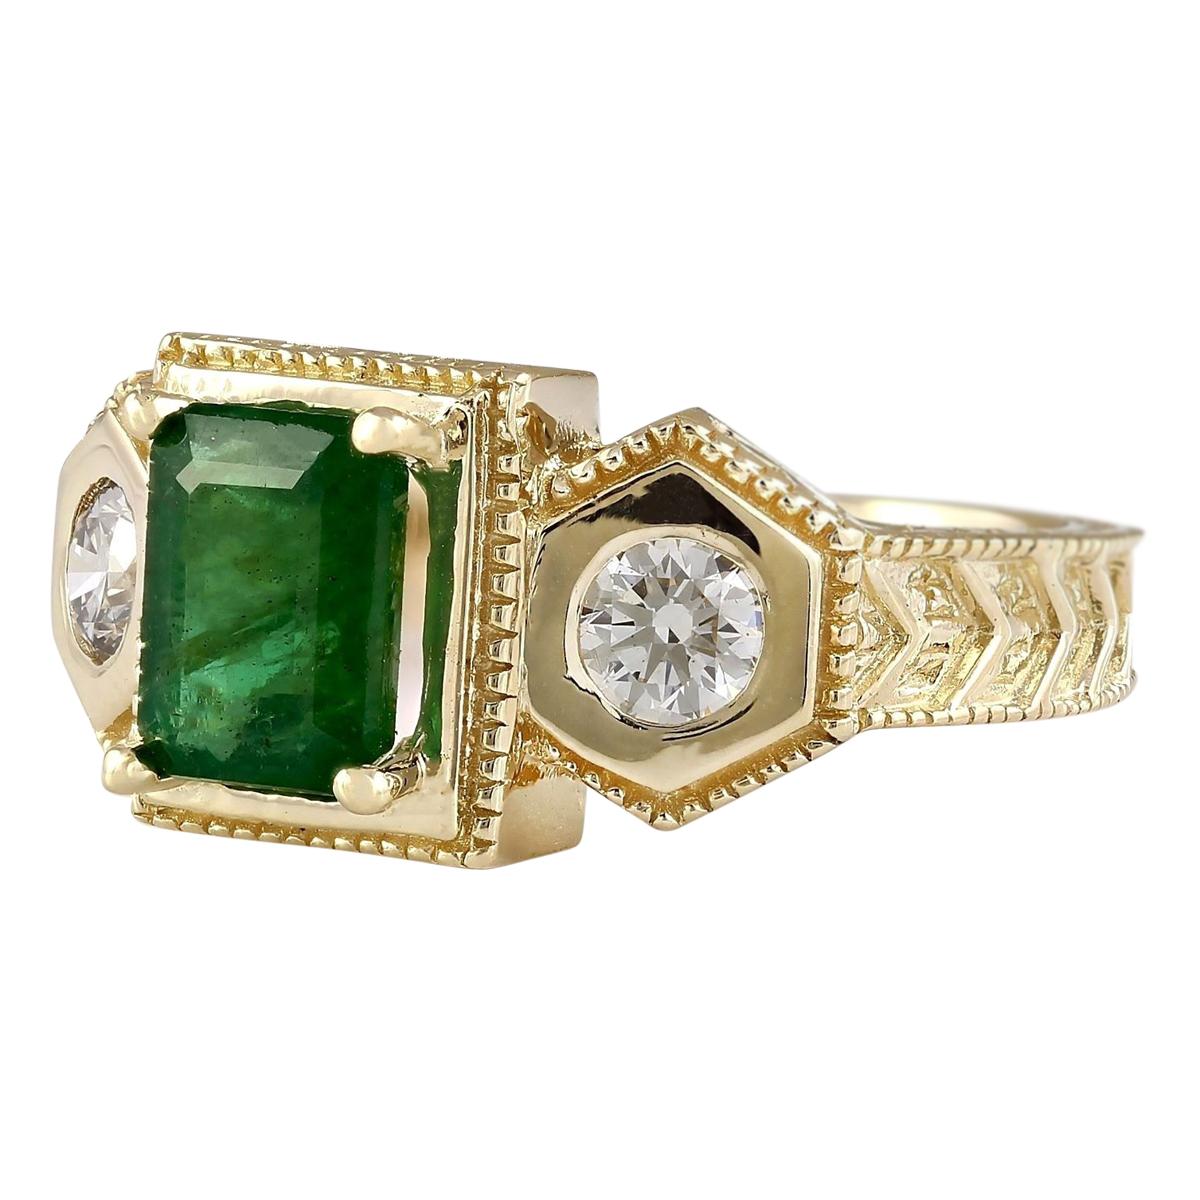 Stamped: 14K Yellow Gold
Total Ring Weight: 9.1 Grams
Total Natural Emerald Weight is 1.74 Carat (Measures: 8.00x6.00 mm)
Color: Green
Total Natural Diamond Weight is 0.60 Carat
Color: F-G, Clarity: VS2-SI1
Face Measures: 10.60x9.50 mm
Sku: [703653W]